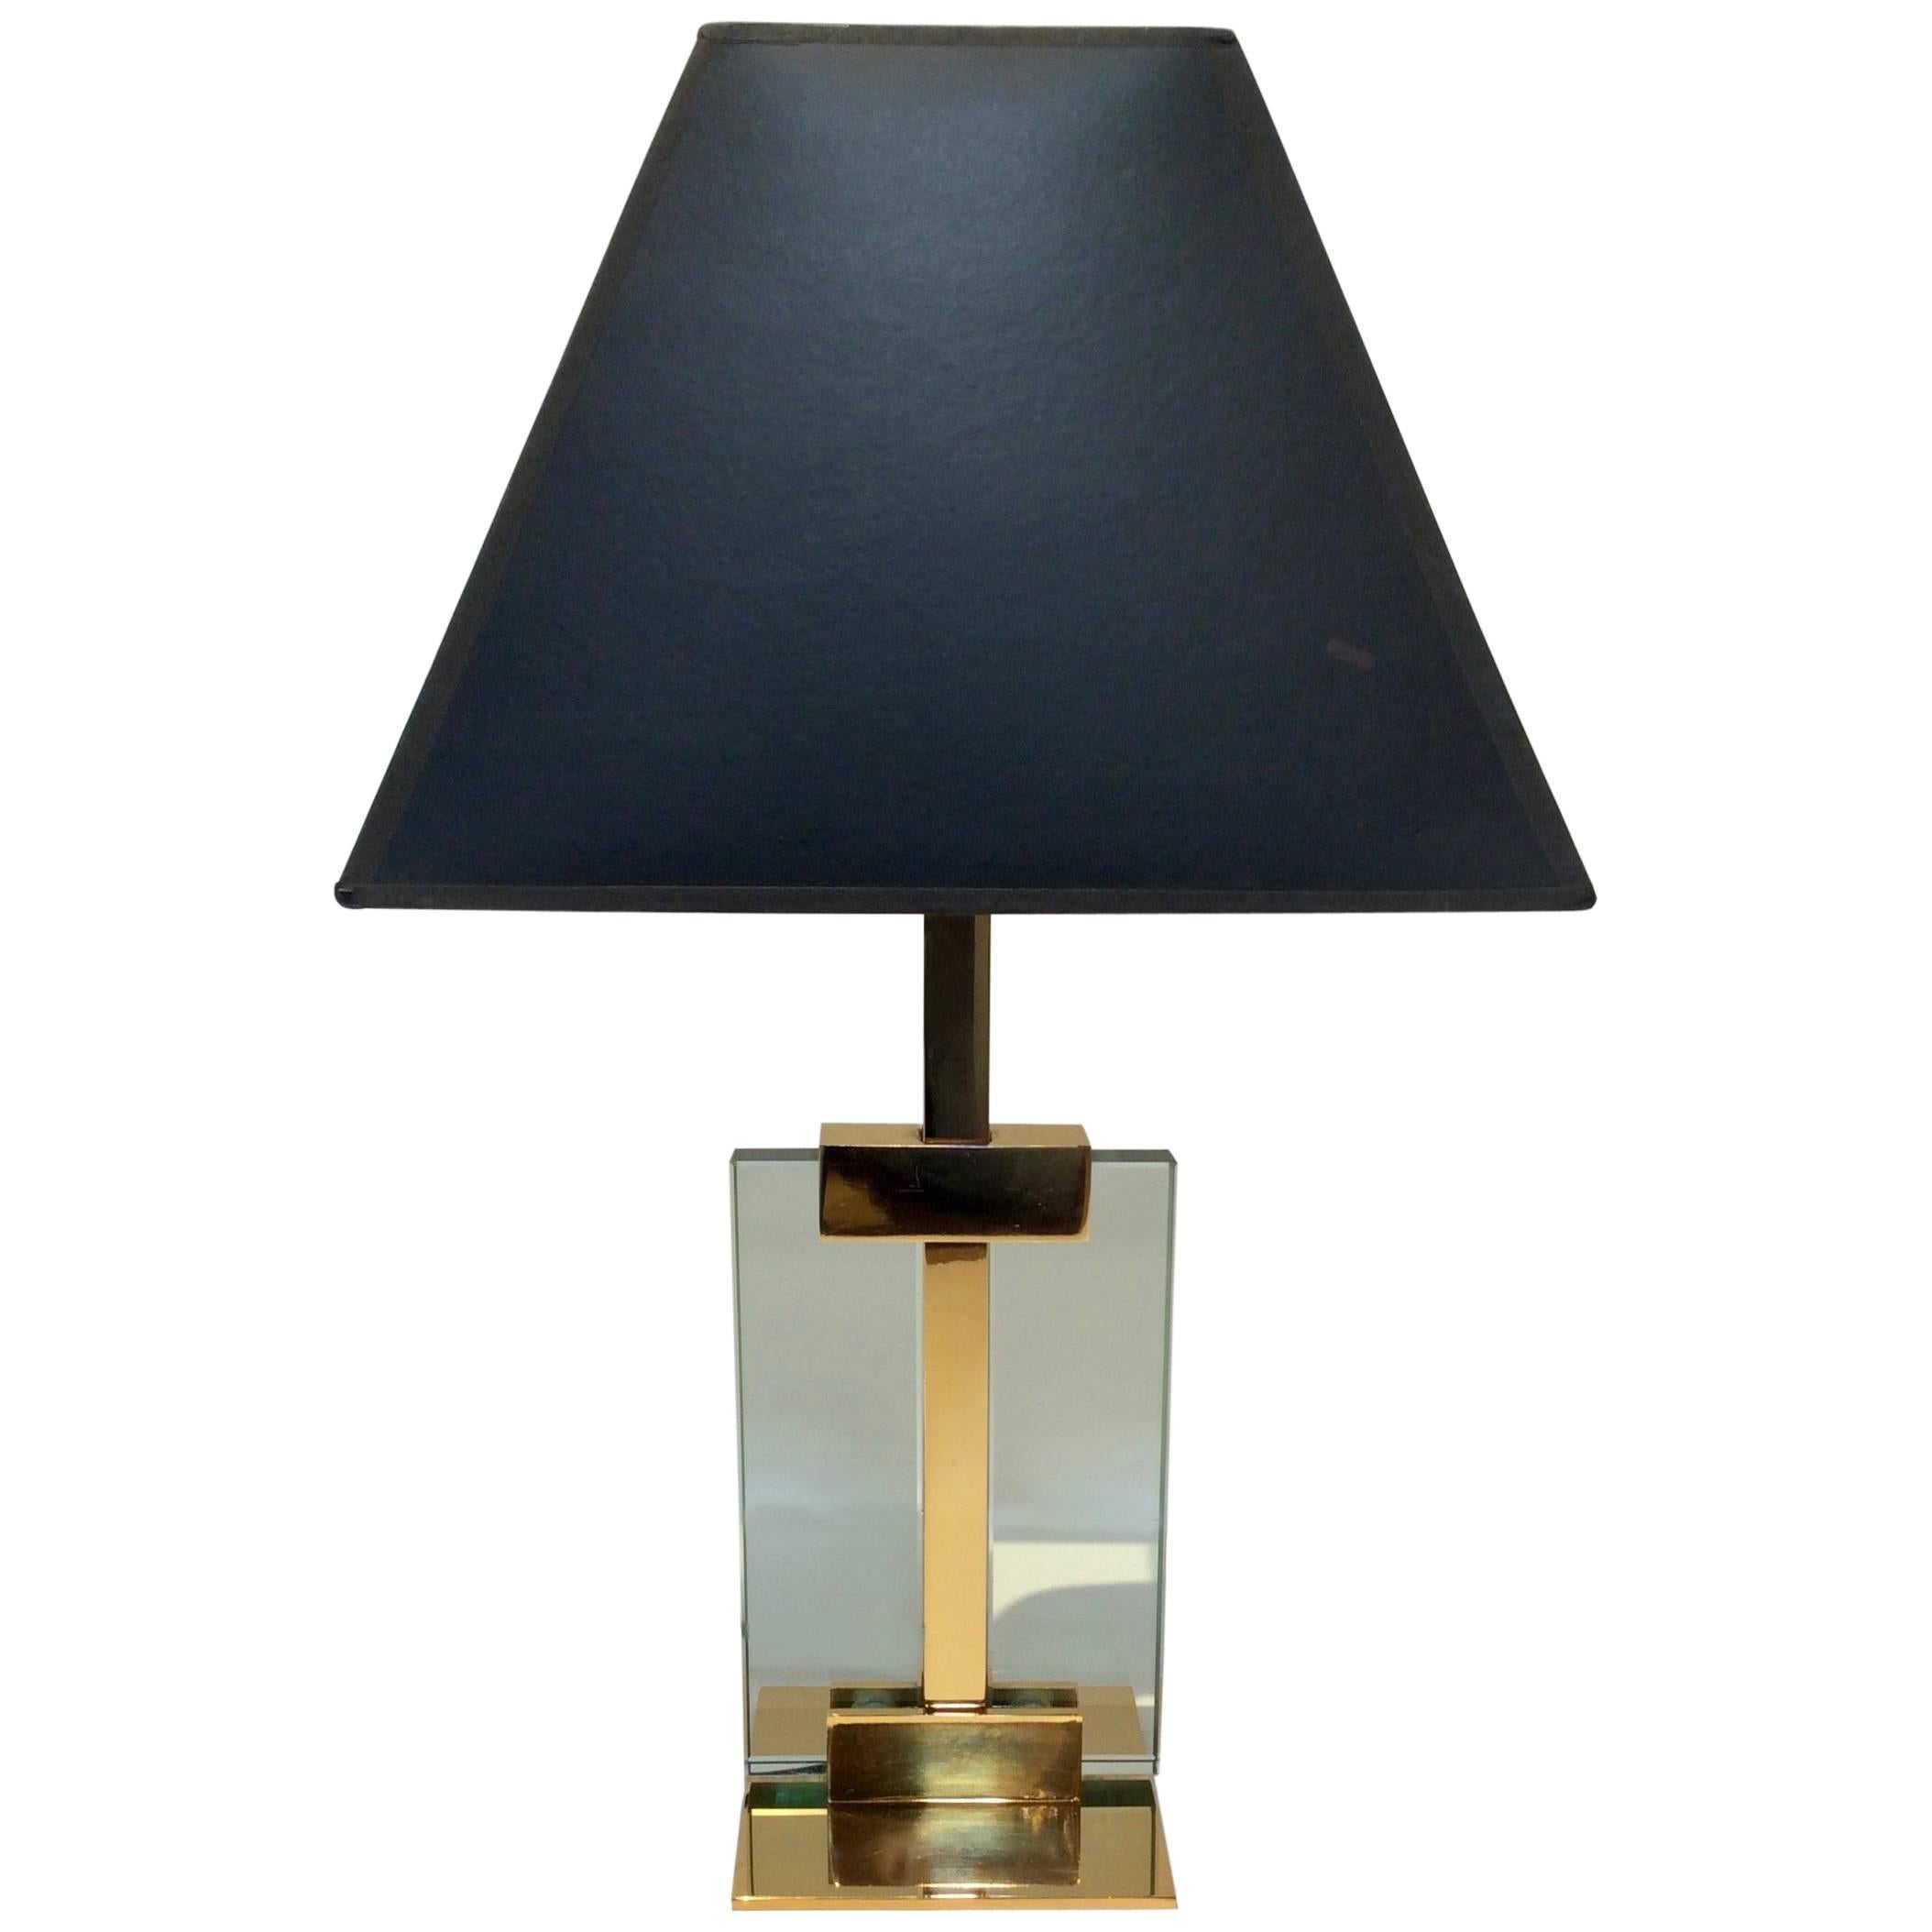 Vintage Brass and Glass Table Lamp, in the Manner of Fontana D'arte